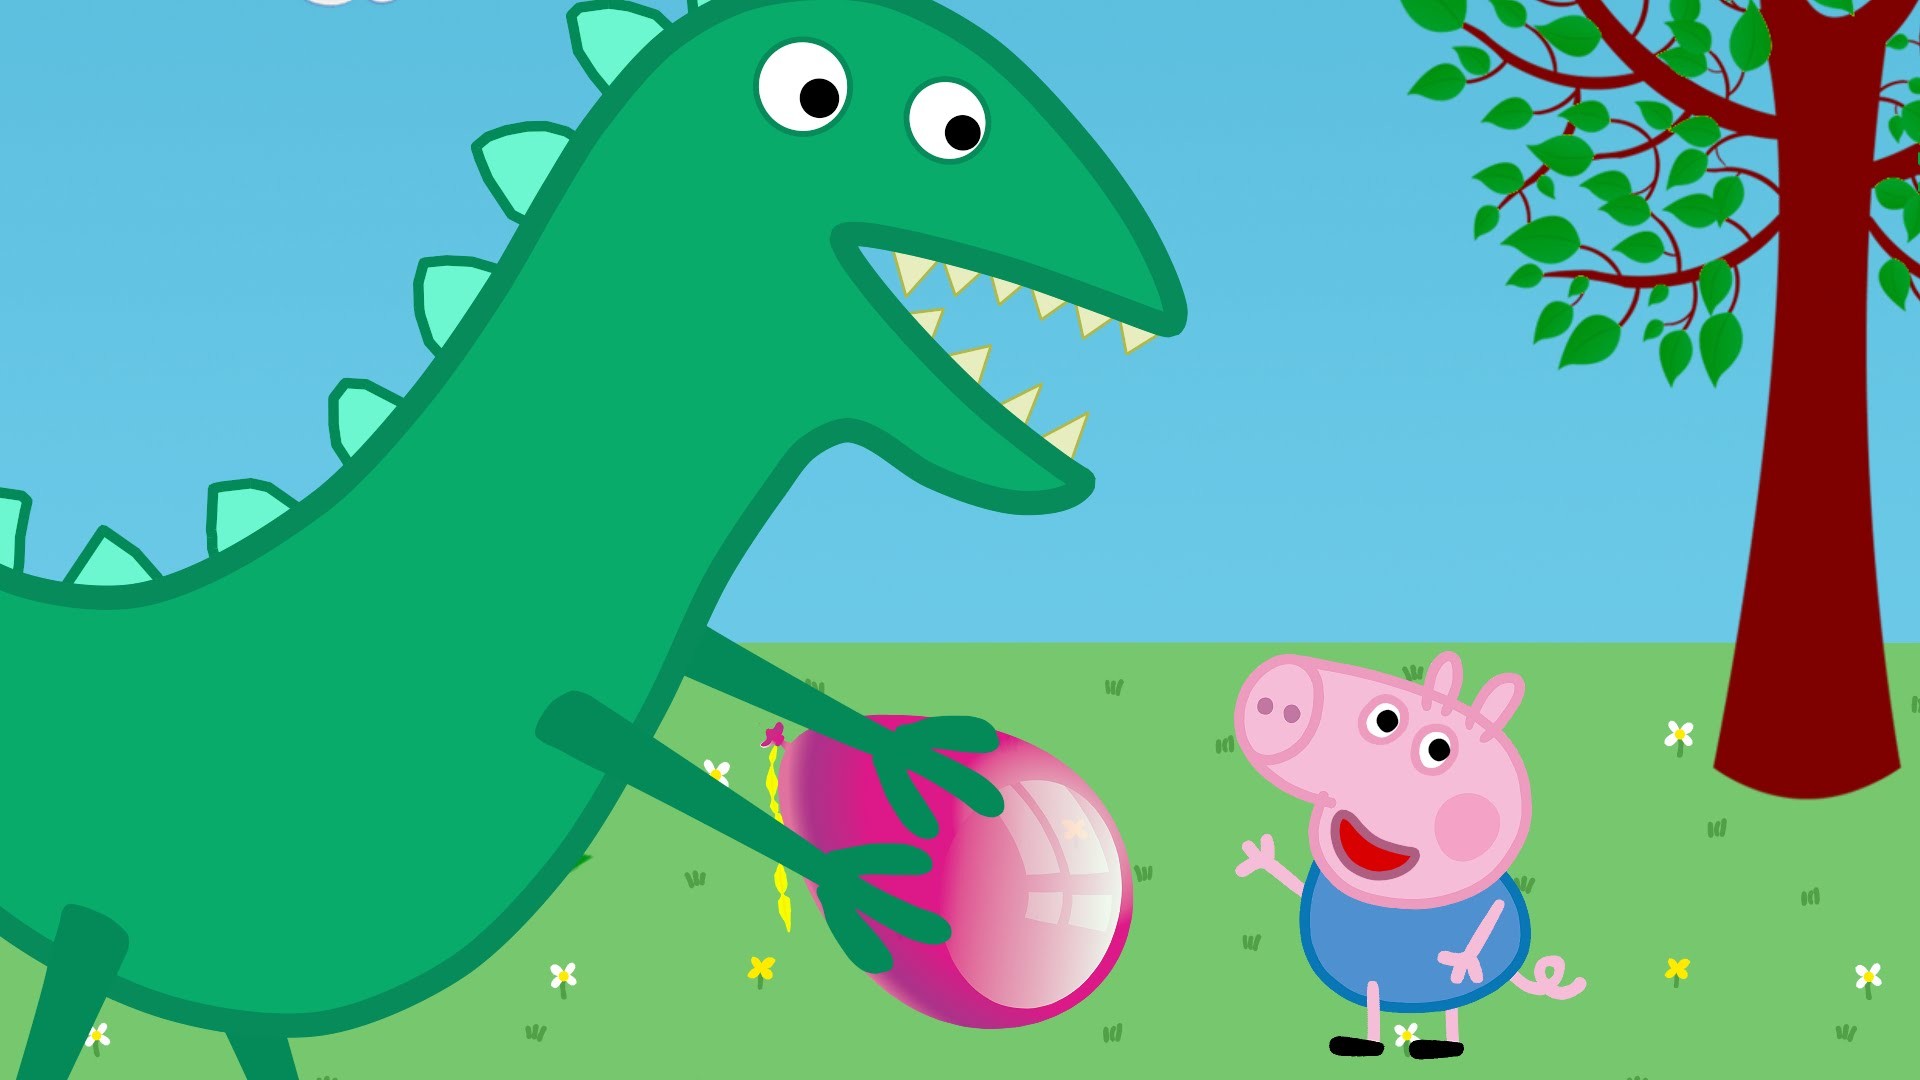 Peppa Pig New Episodes 2016 * George Crying - Dinosaur From Peppa Pig - HD Wallpaper 